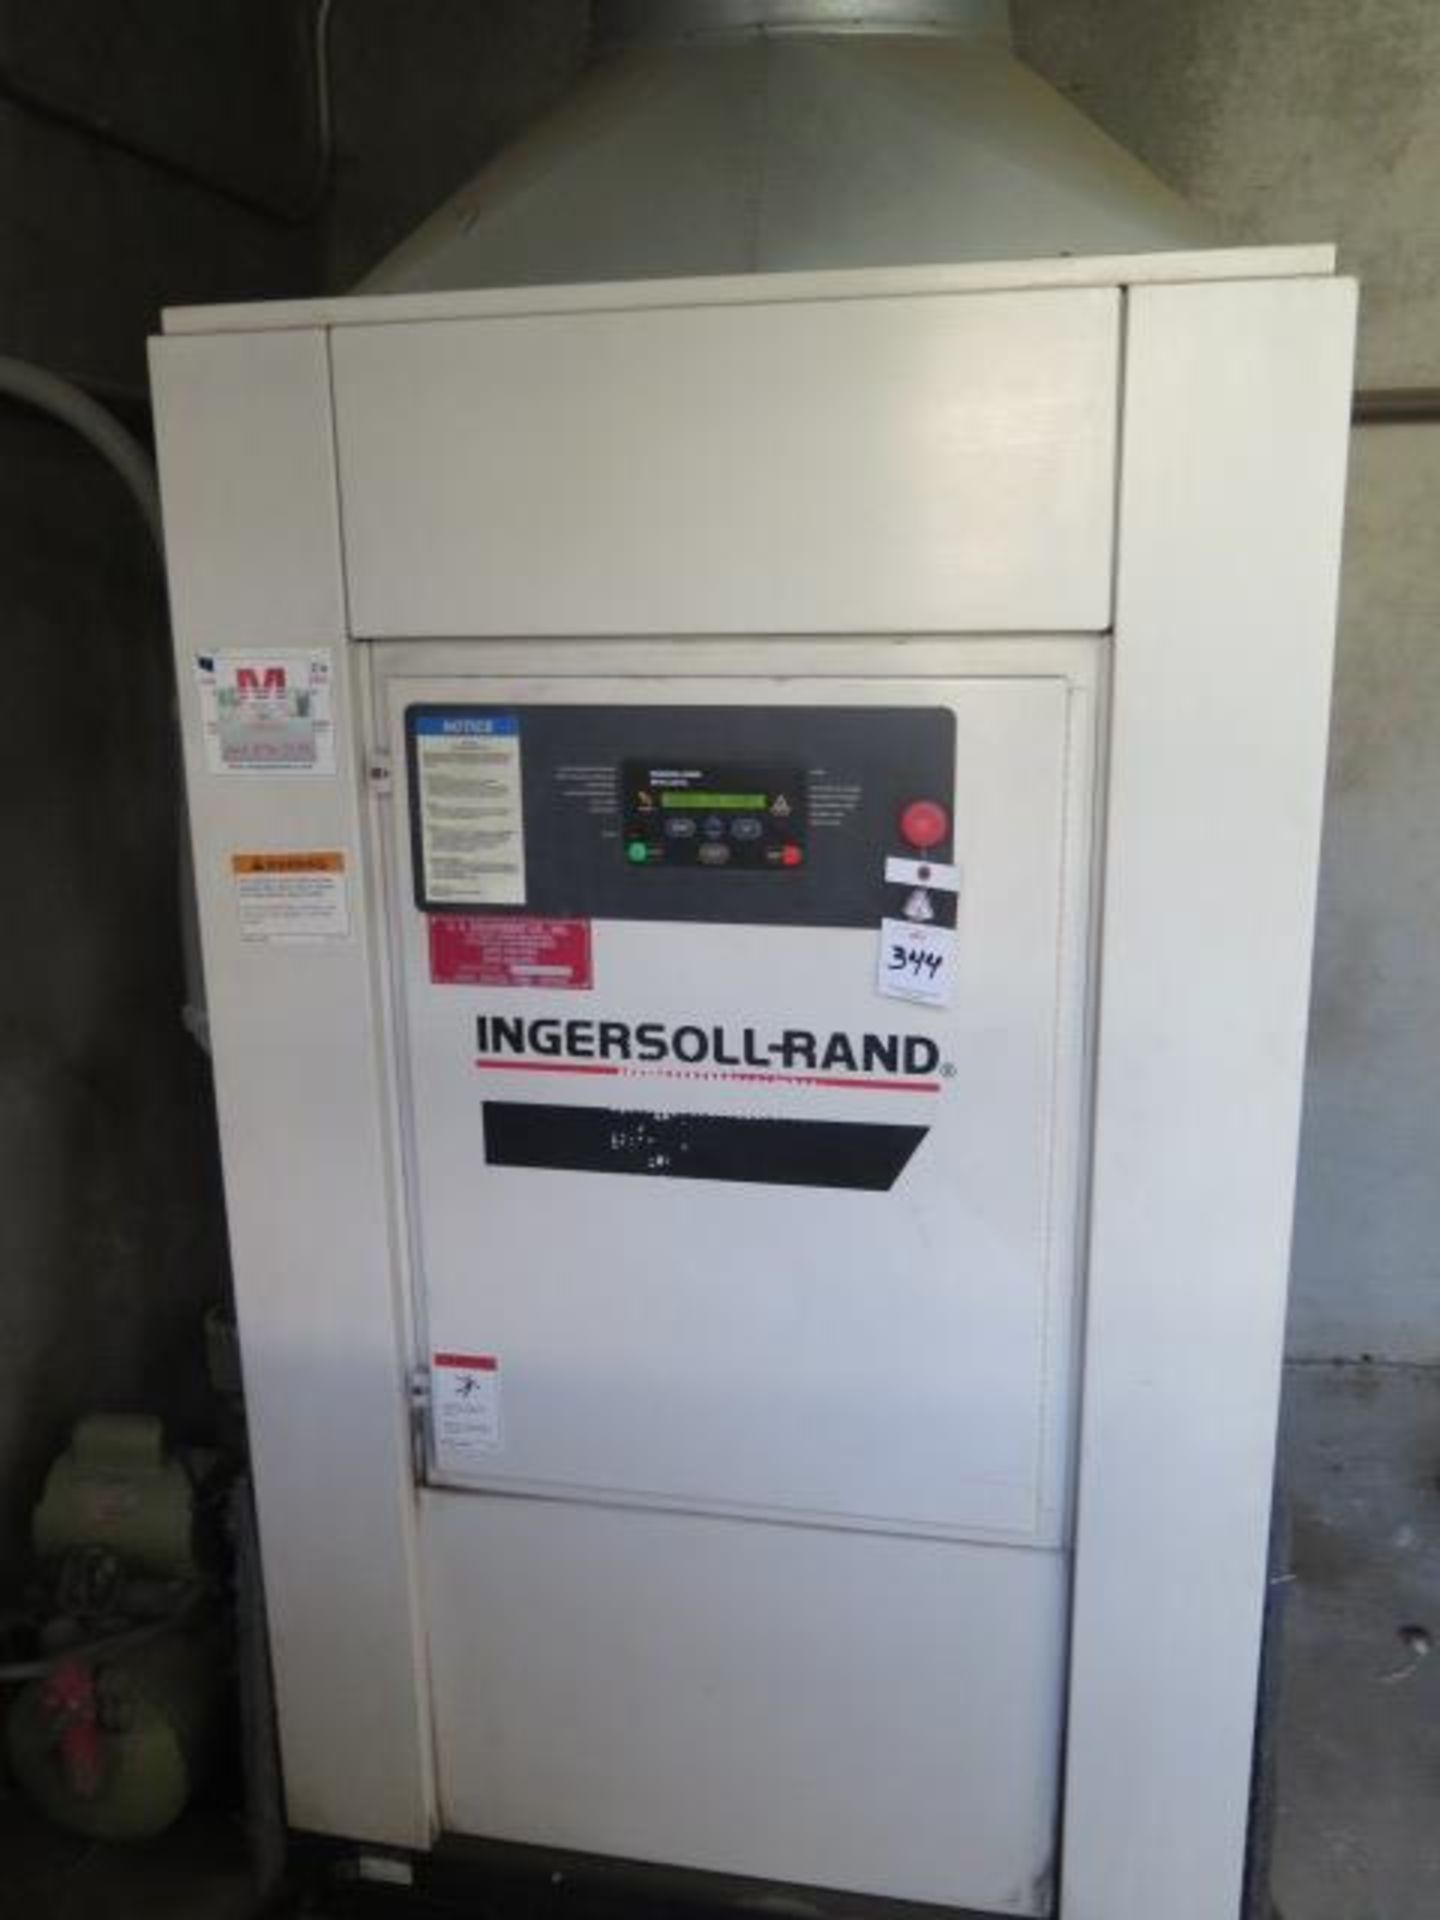 Ingersoll Rand SSR-EP50SE 50Hp Rotary Air Comp s/n G8221U99341 w/ Intellisys Controls, SOLD AS IS - Image 2 of 7